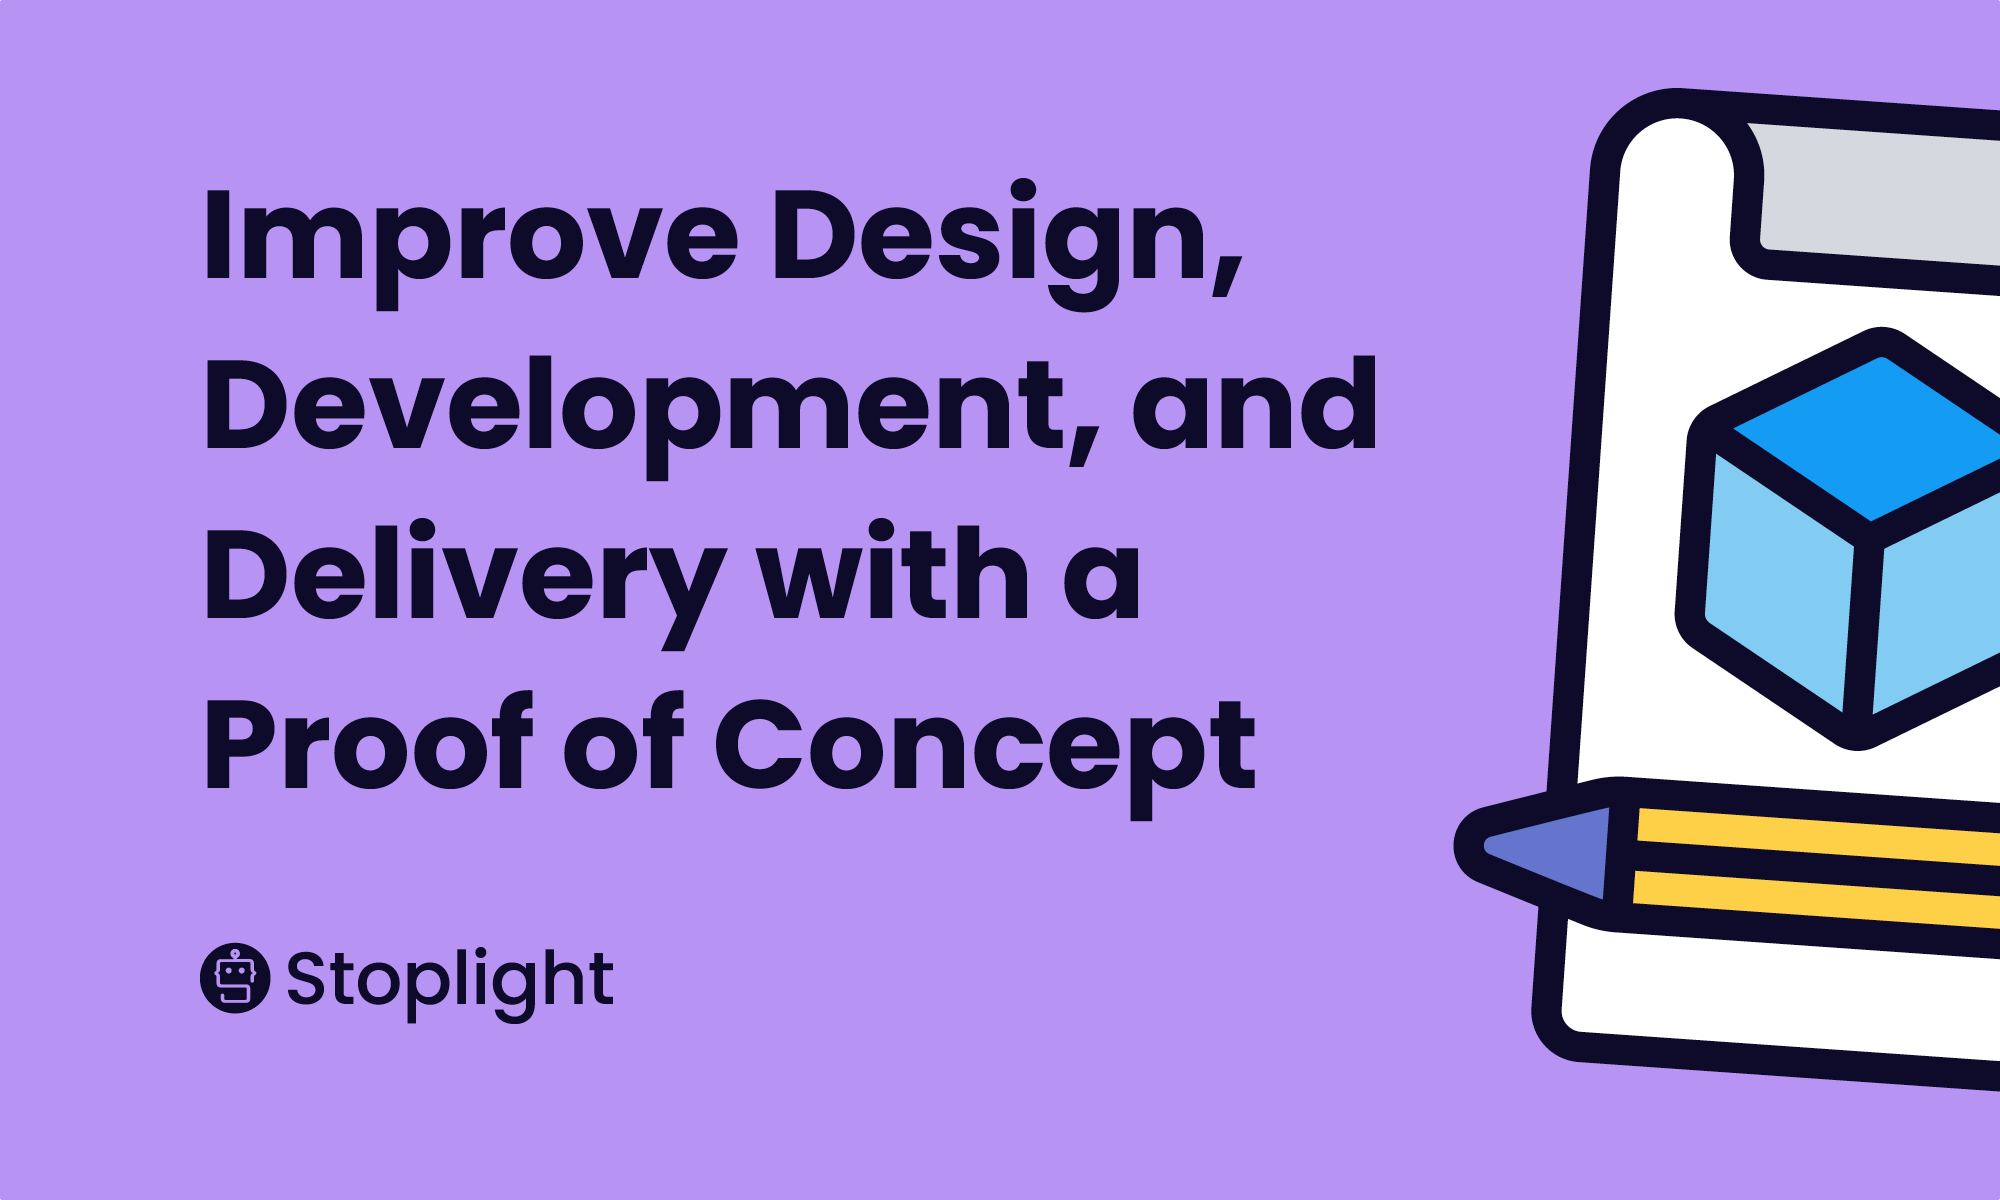 Improve Design, Development, and Delivery with a Proof of Concept